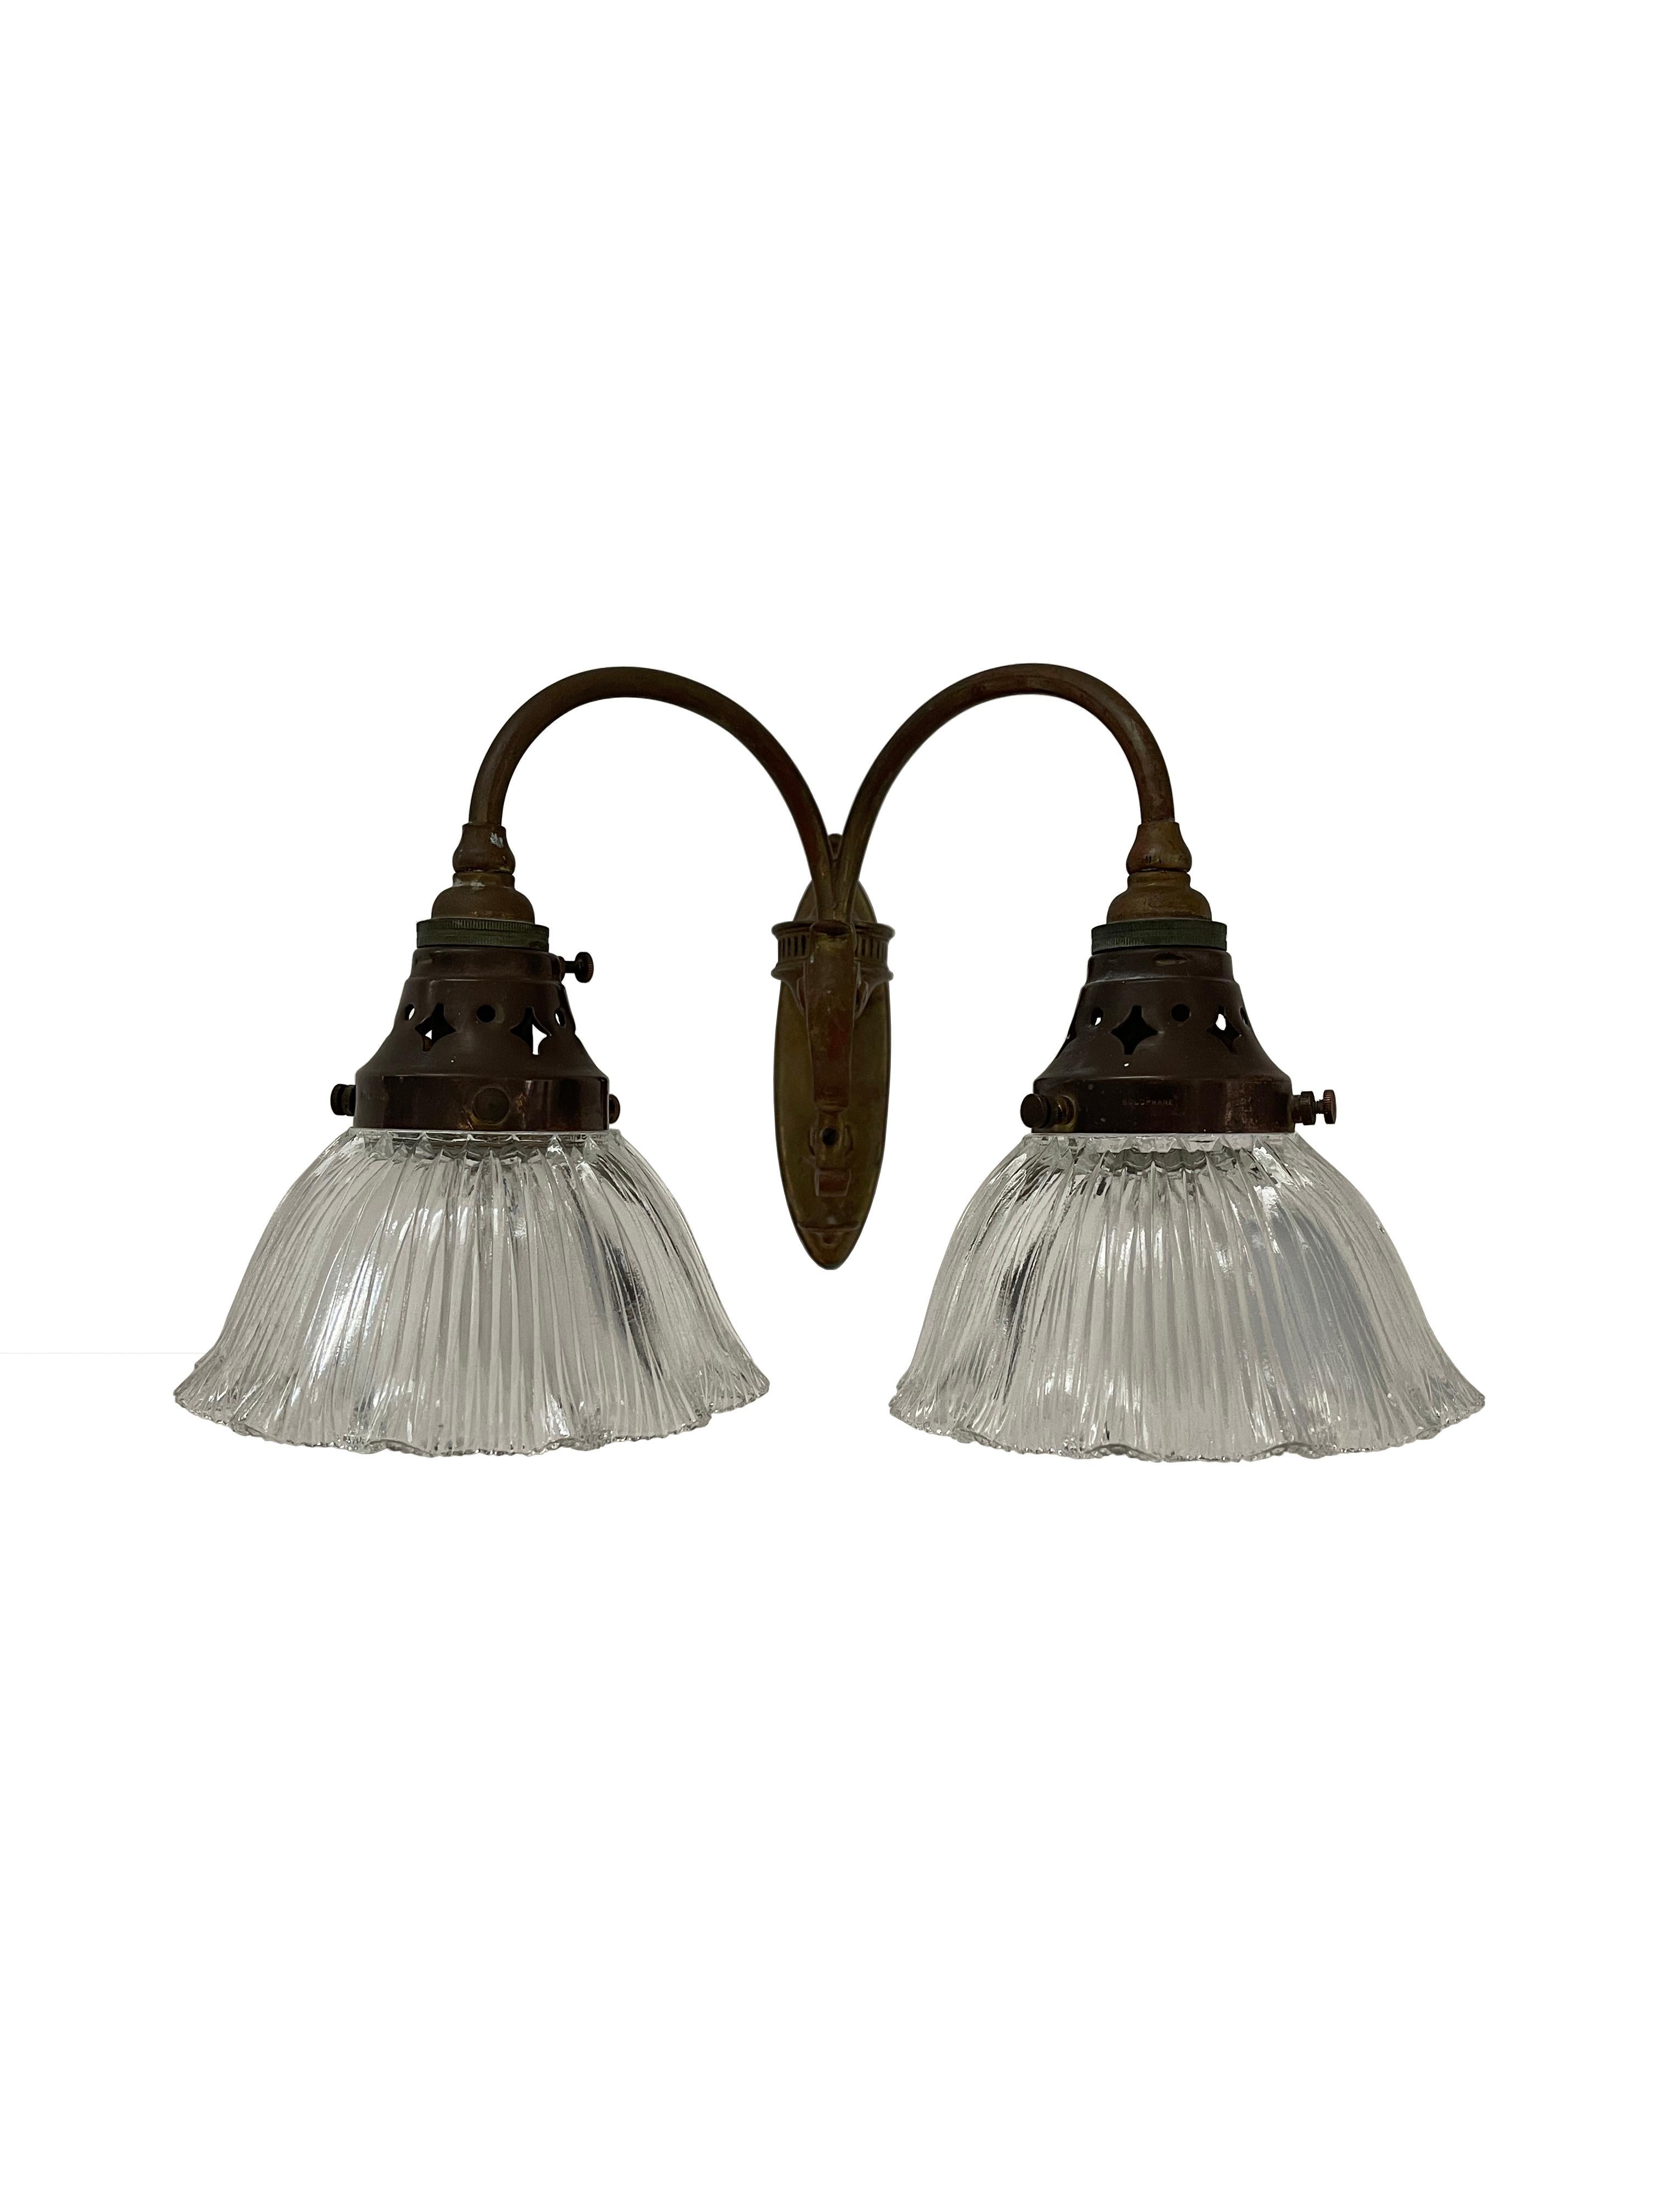 Large Antique Vintage Holophane Ceiling Chandelier Pendant Lamp Wall Light Set In Good Condition For Sale In Sale, GB